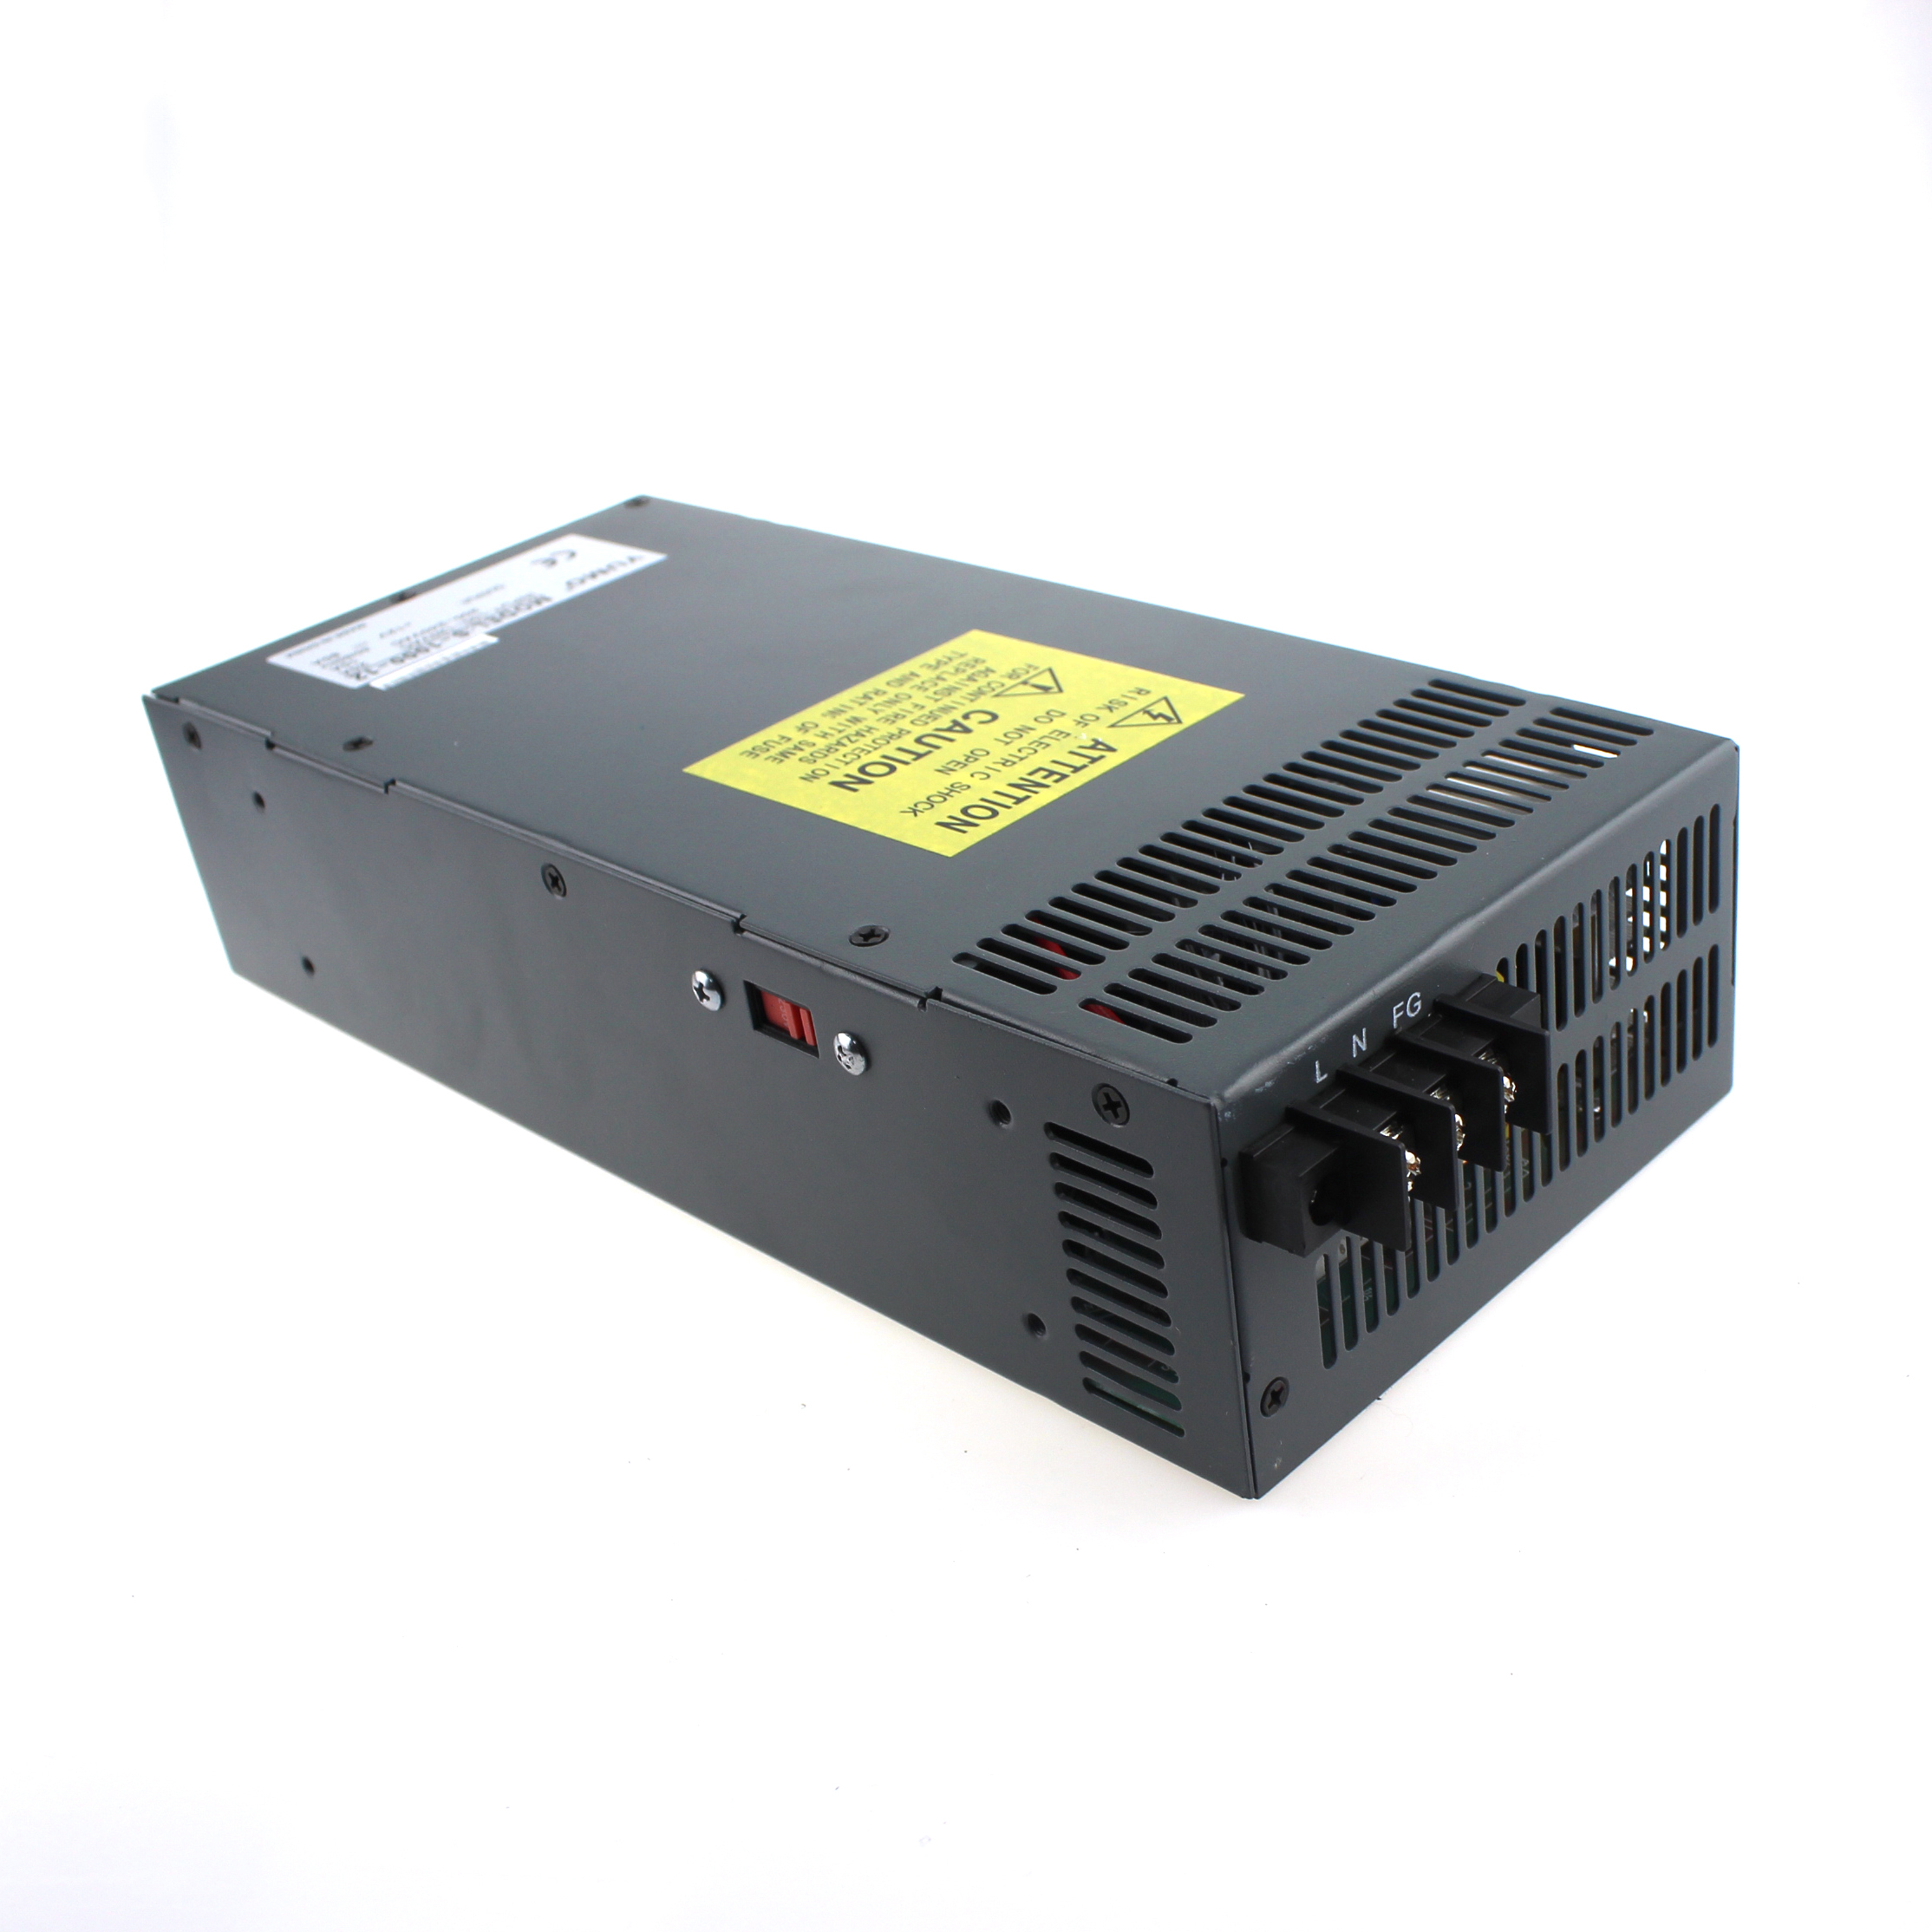 S-1000-12 High Quality 1000W 12VDC SMPS Switching Power Supply